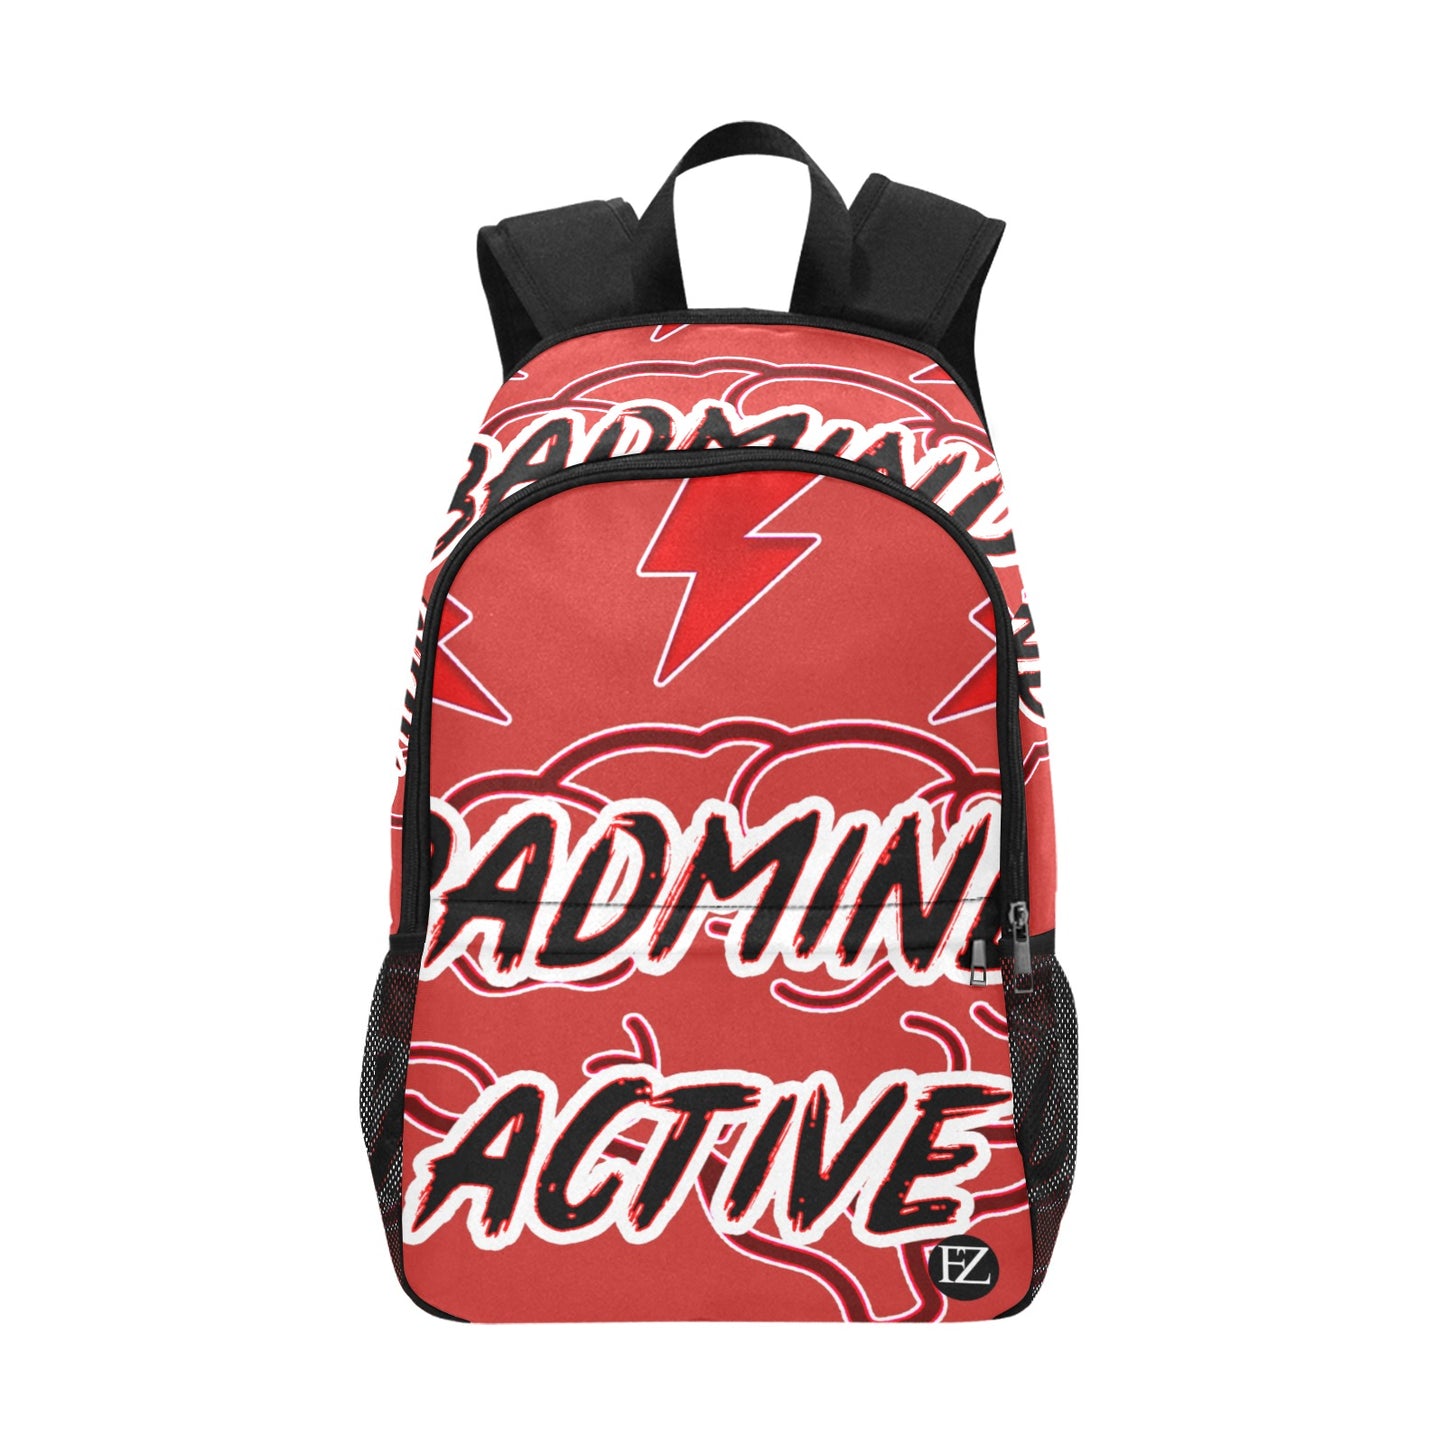 fz mind backpack one size / fz mind backpack - red all-over print unisex casual backpack with side mesh pockets (model 1659)